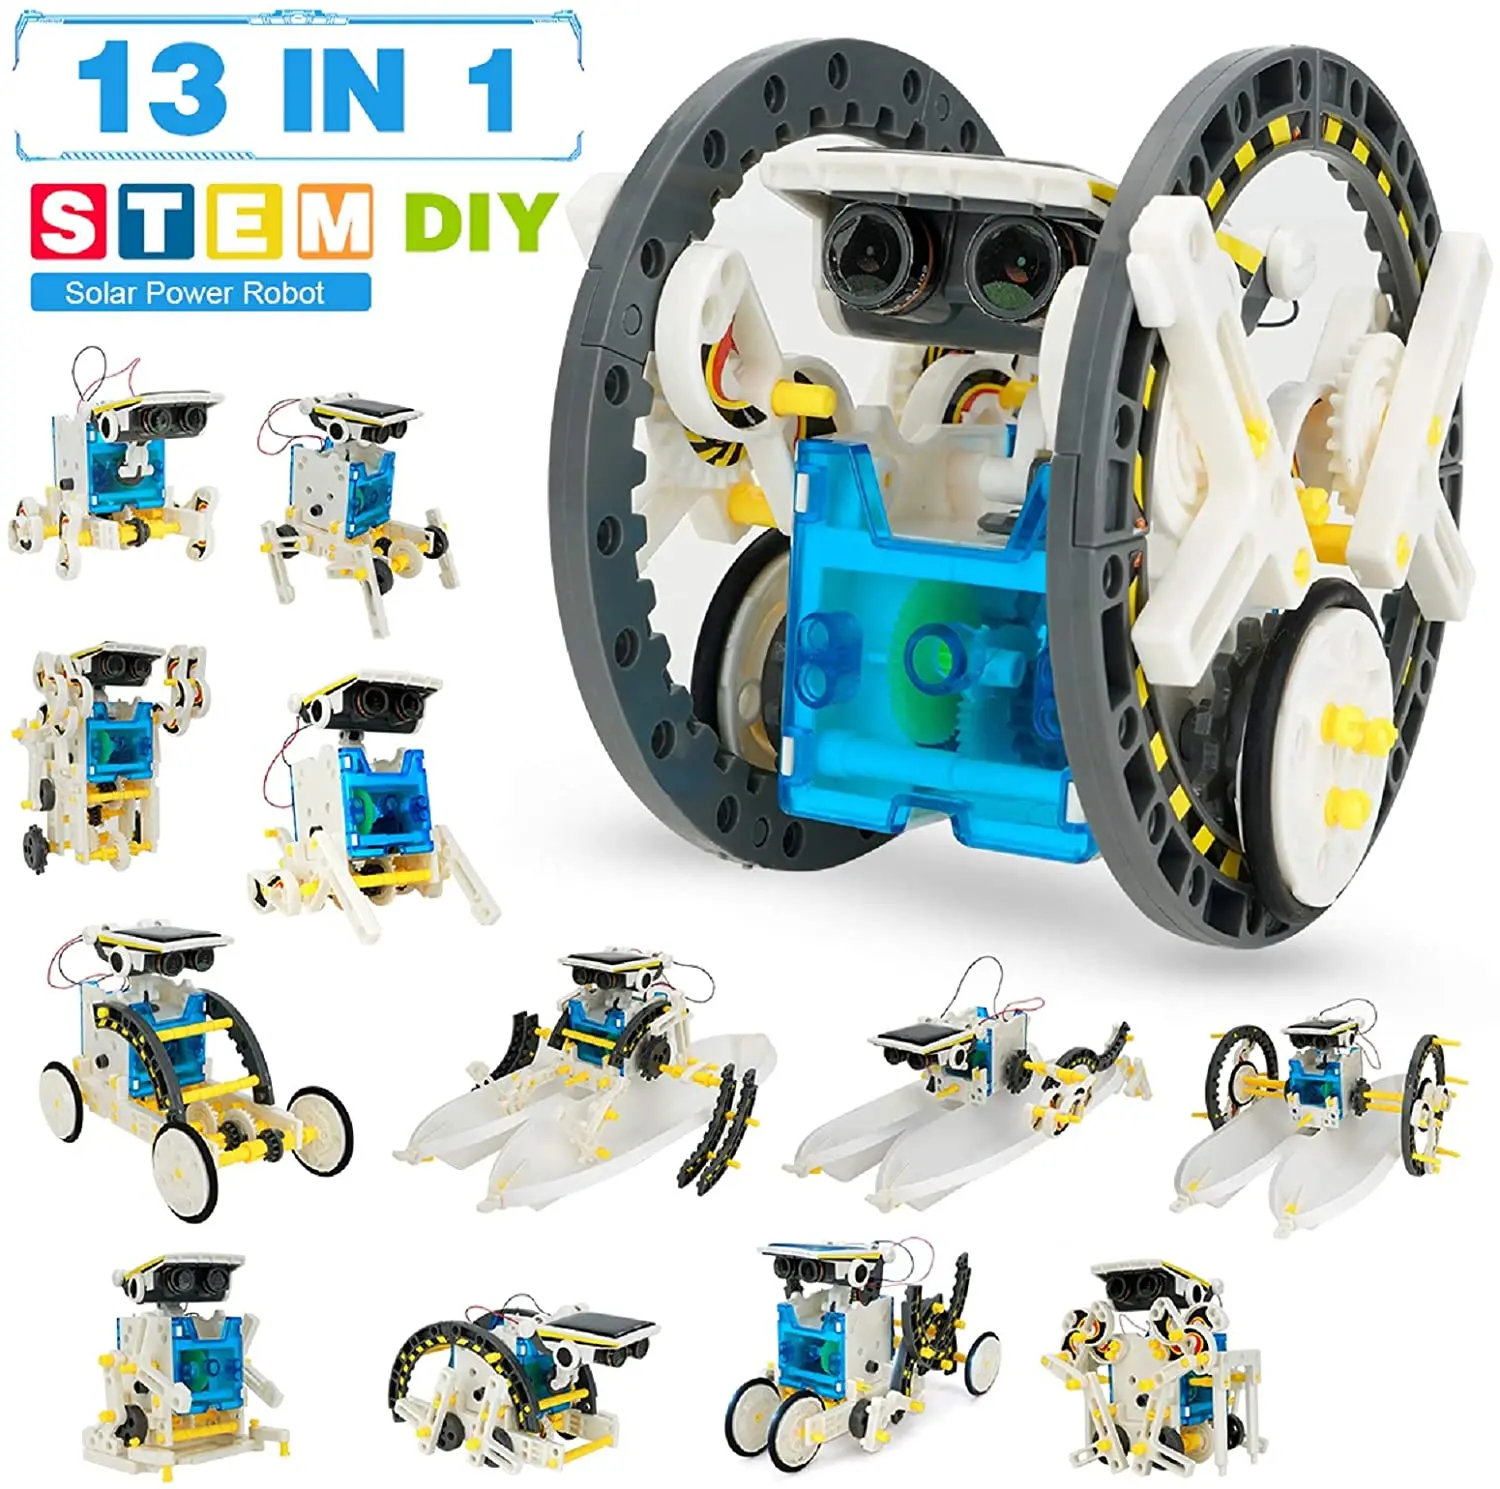 stem solar robot educational toys technology science kits learning development scientific fantasy toy for kids children boys free global shipping